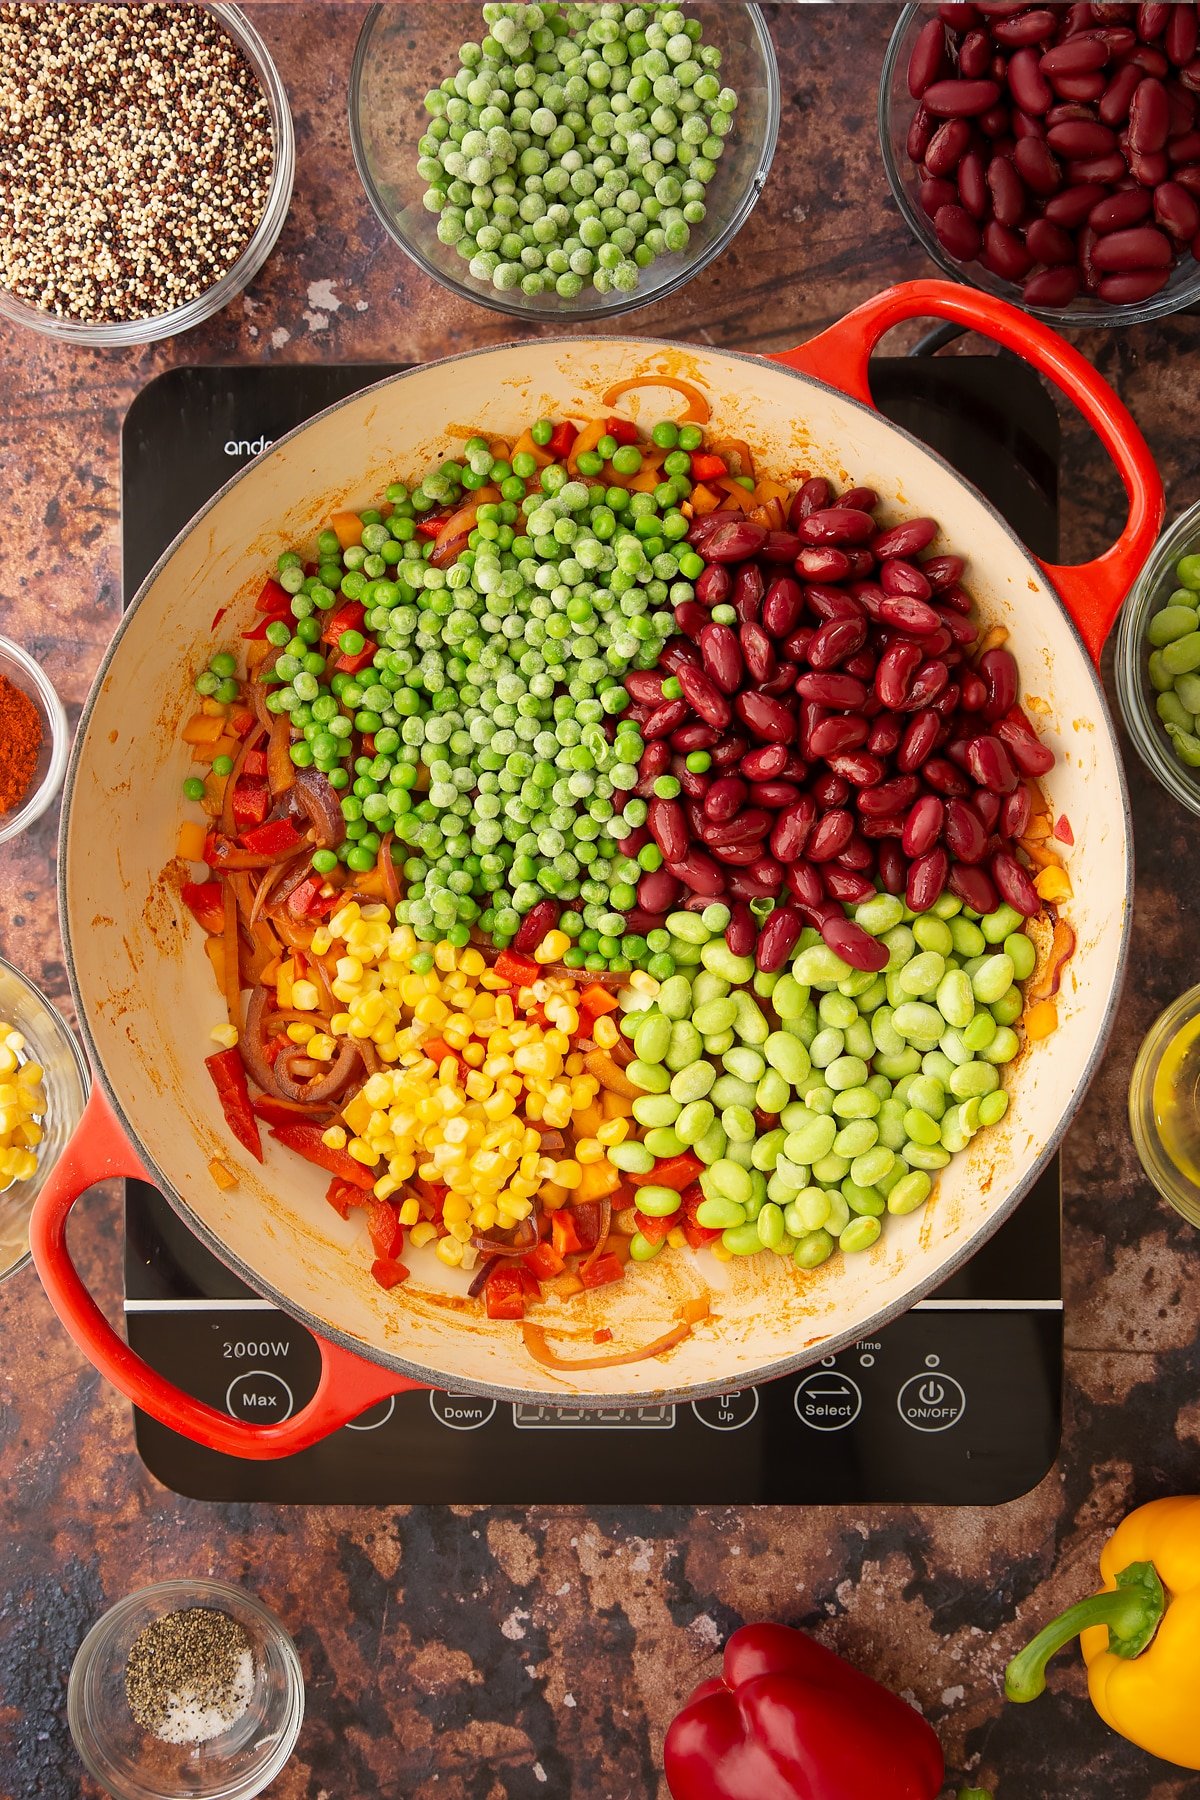 Overhead shot of some of the ingredients required to make the Zesty bean quinoa in a pan on the hob.